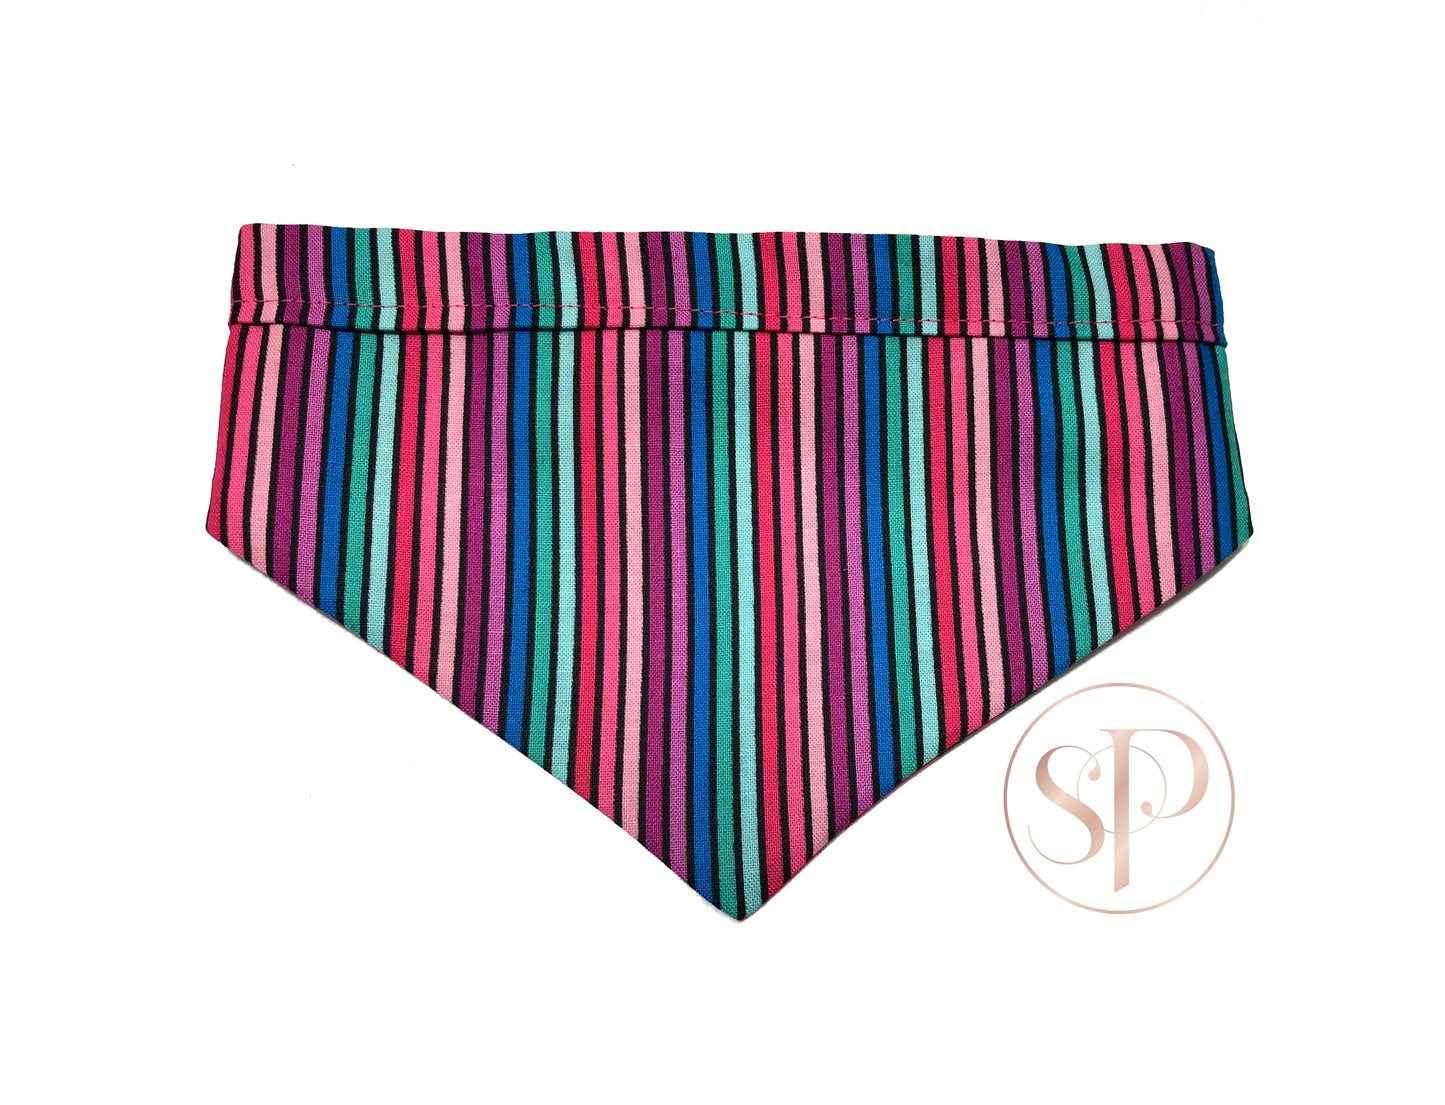 Party Pups in Pink & Stripes Reversible Dog Bandanas